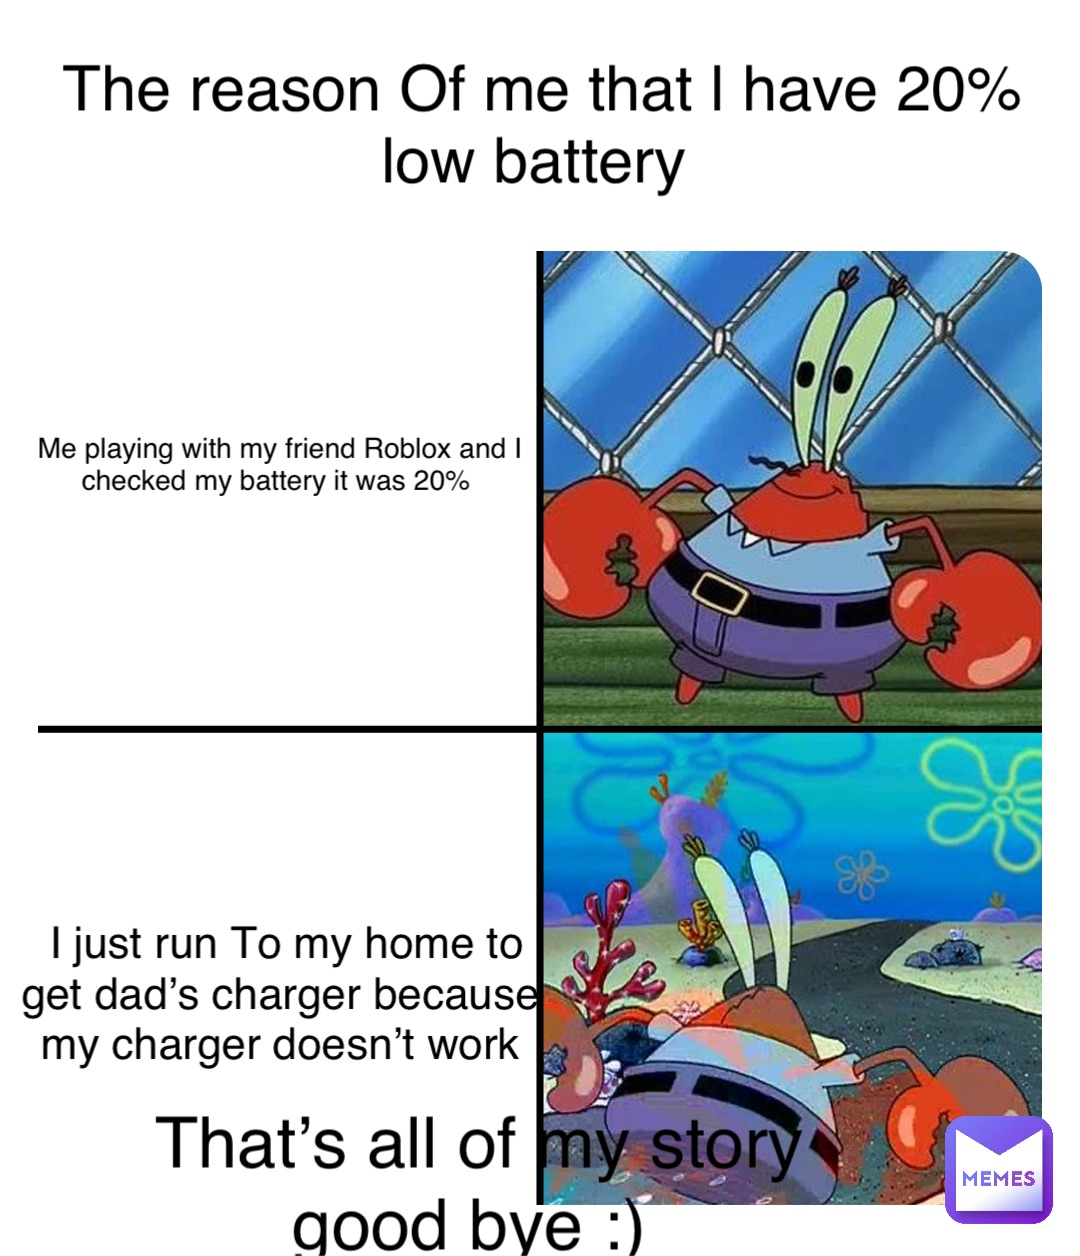 Double tap to edit The reason Of me that l have 20% low battery Me playing with my friend Roblox and I checked my battery it was 20% I just run To my home to get dad’s charger because my charger doesn’t work That’s all of my story good bye :)